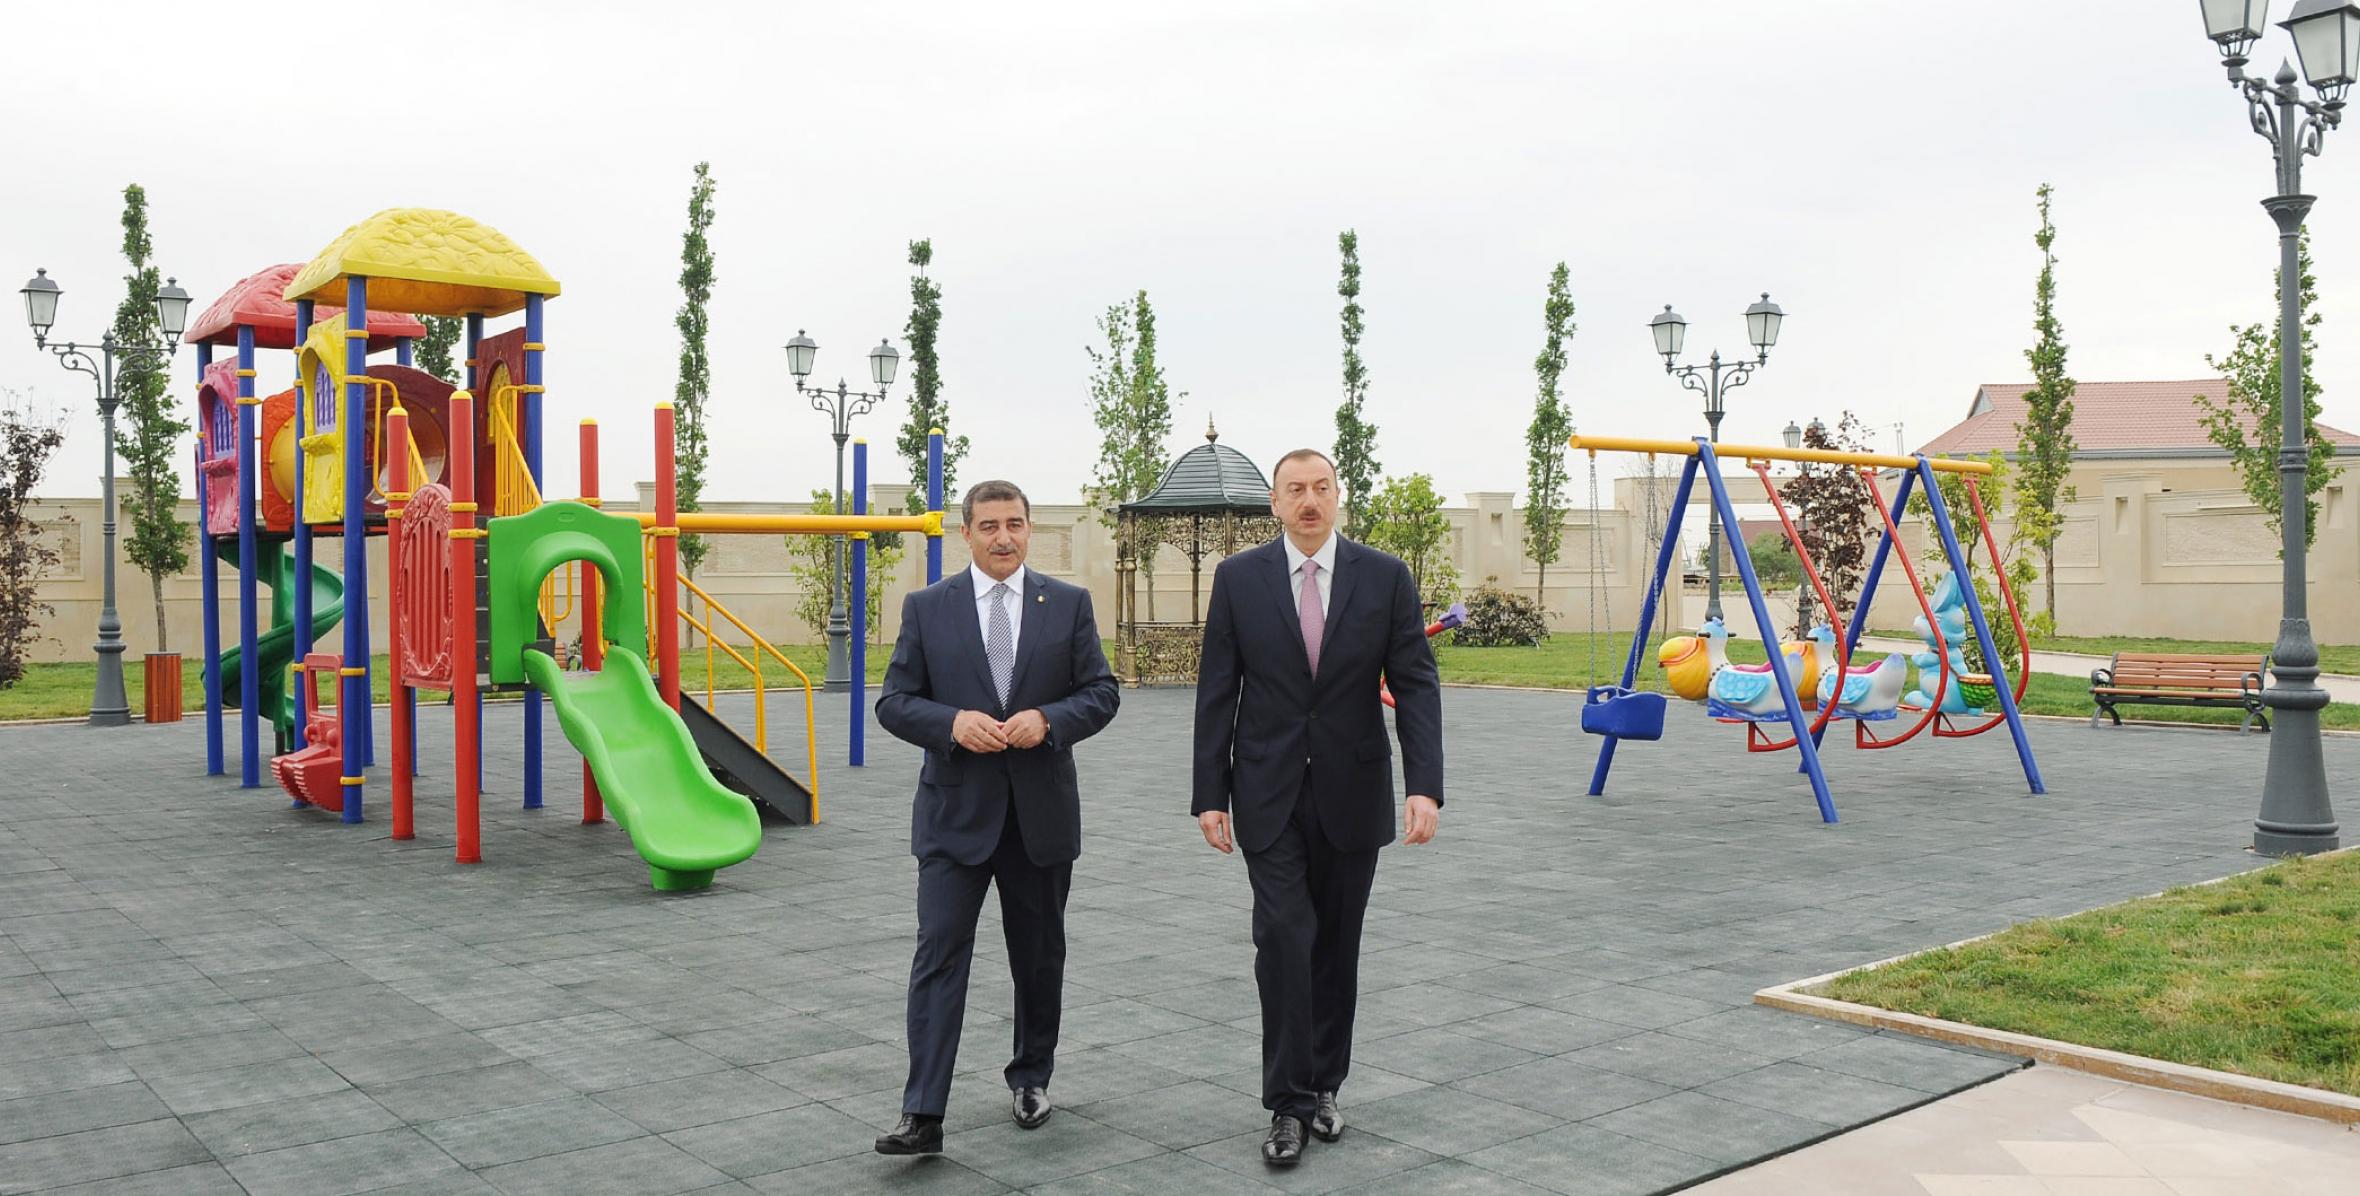 Ilham Aliyev attended the opening of a new park at the section of the Heydar Aliyev Avenue crossing the Surakhani district